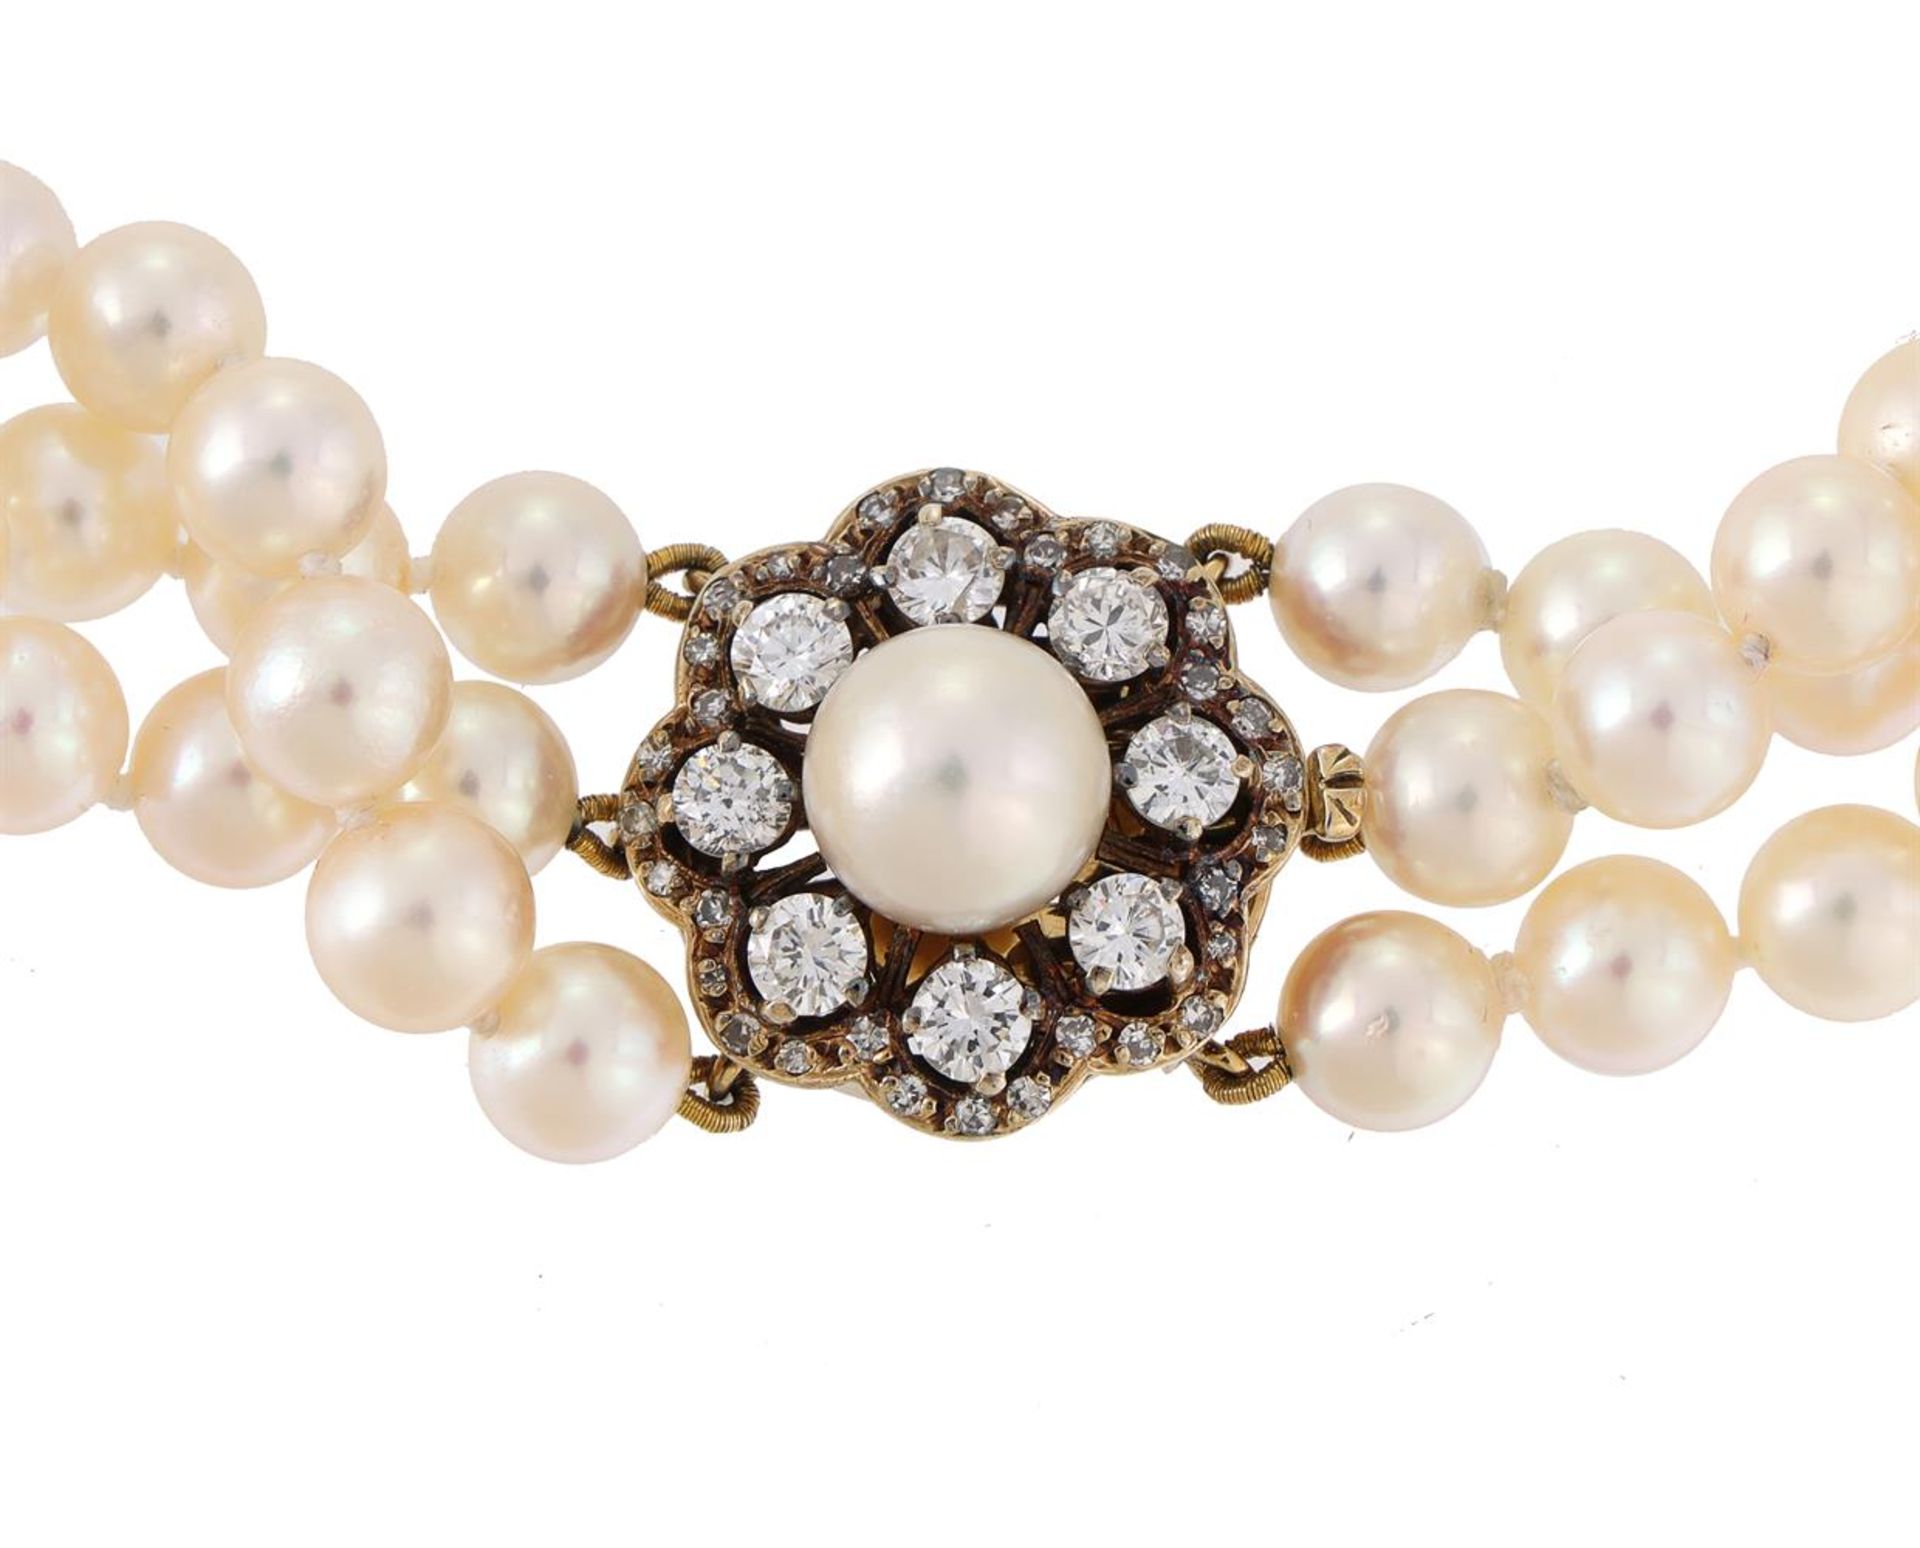 A THREE ROW CULTURED PEARL NECKLACE WITH DIAMOND AND CULTURED PEARL CLUSTER CLASP - Image 2 of 2